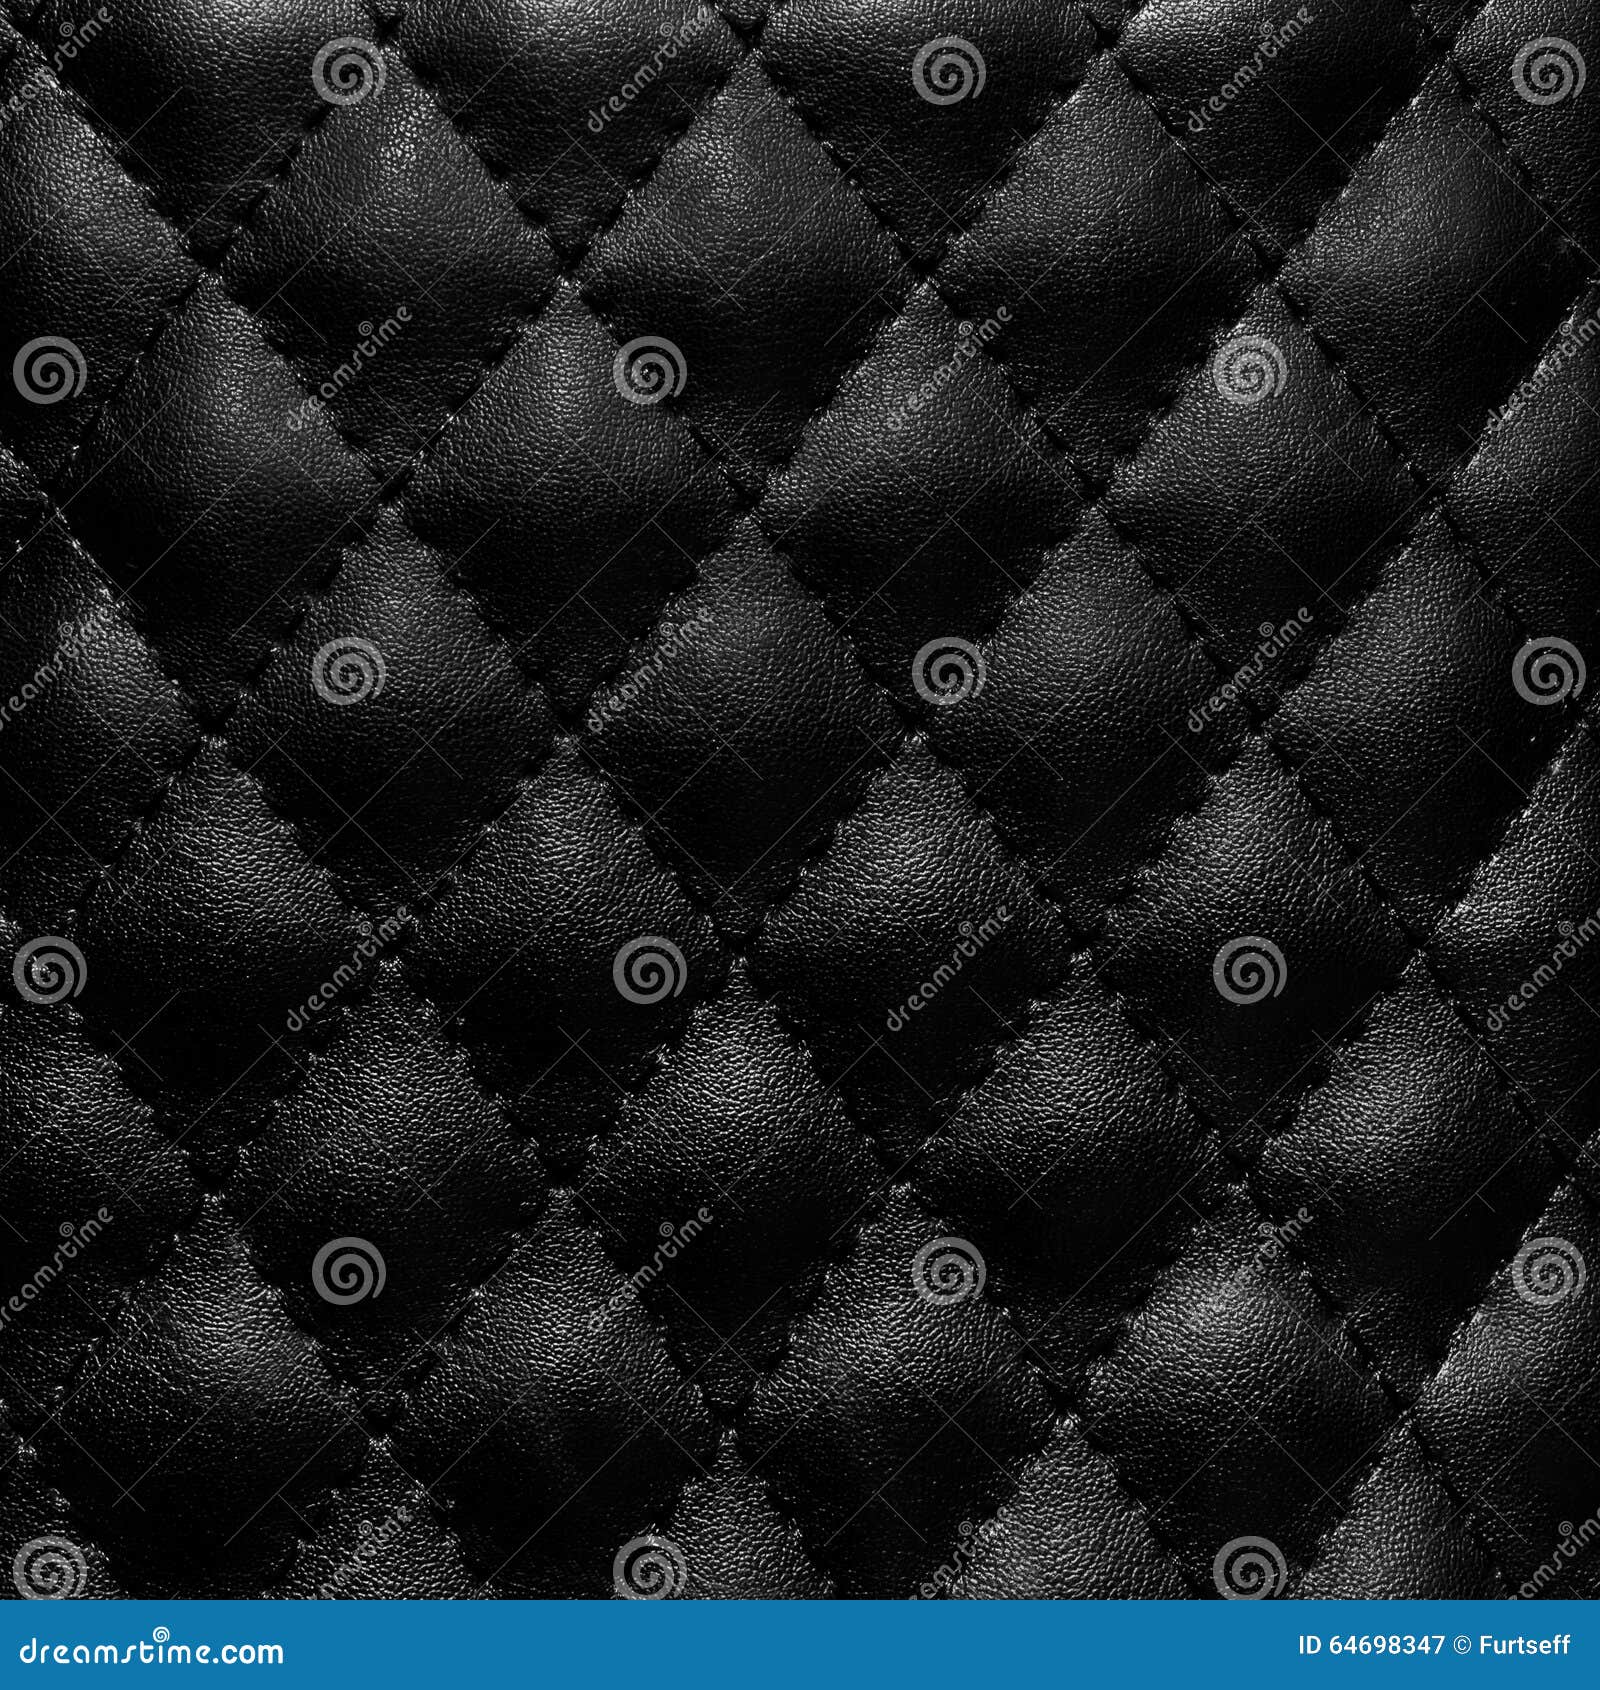 Black quilted leather stock image. Image of retro, rhomb - 64698347